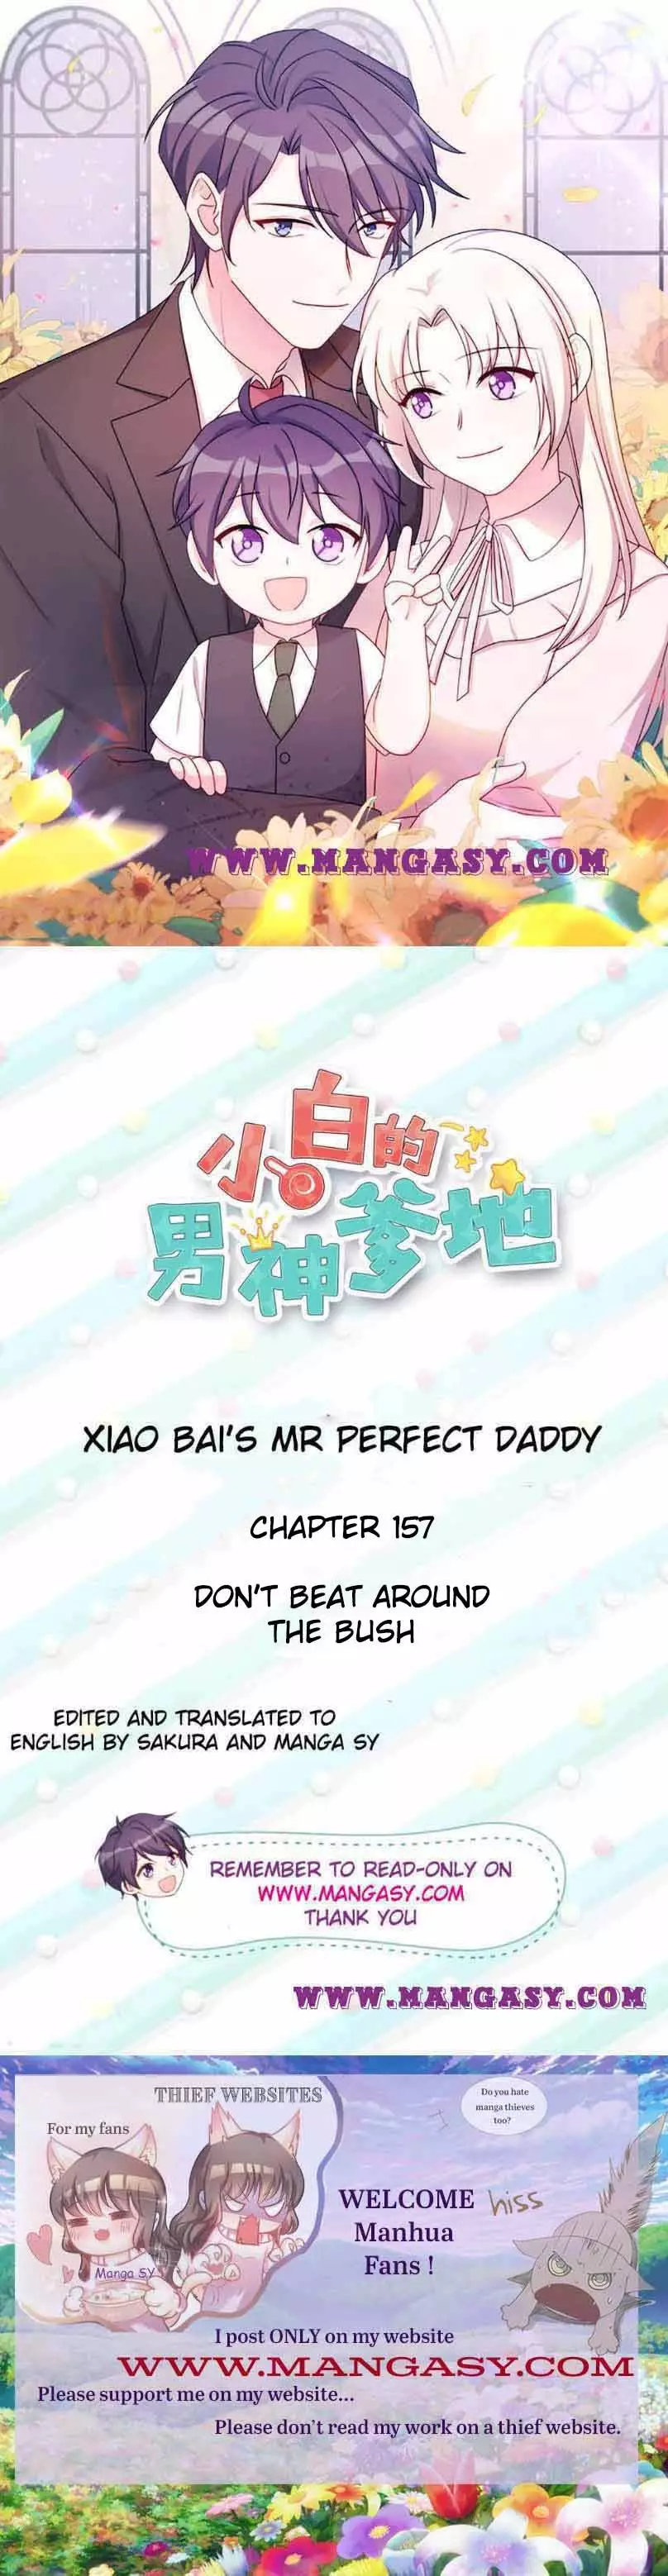 Xiao Bai’S Father Is A Wonderful Person - 157 page 1-2137ee3c